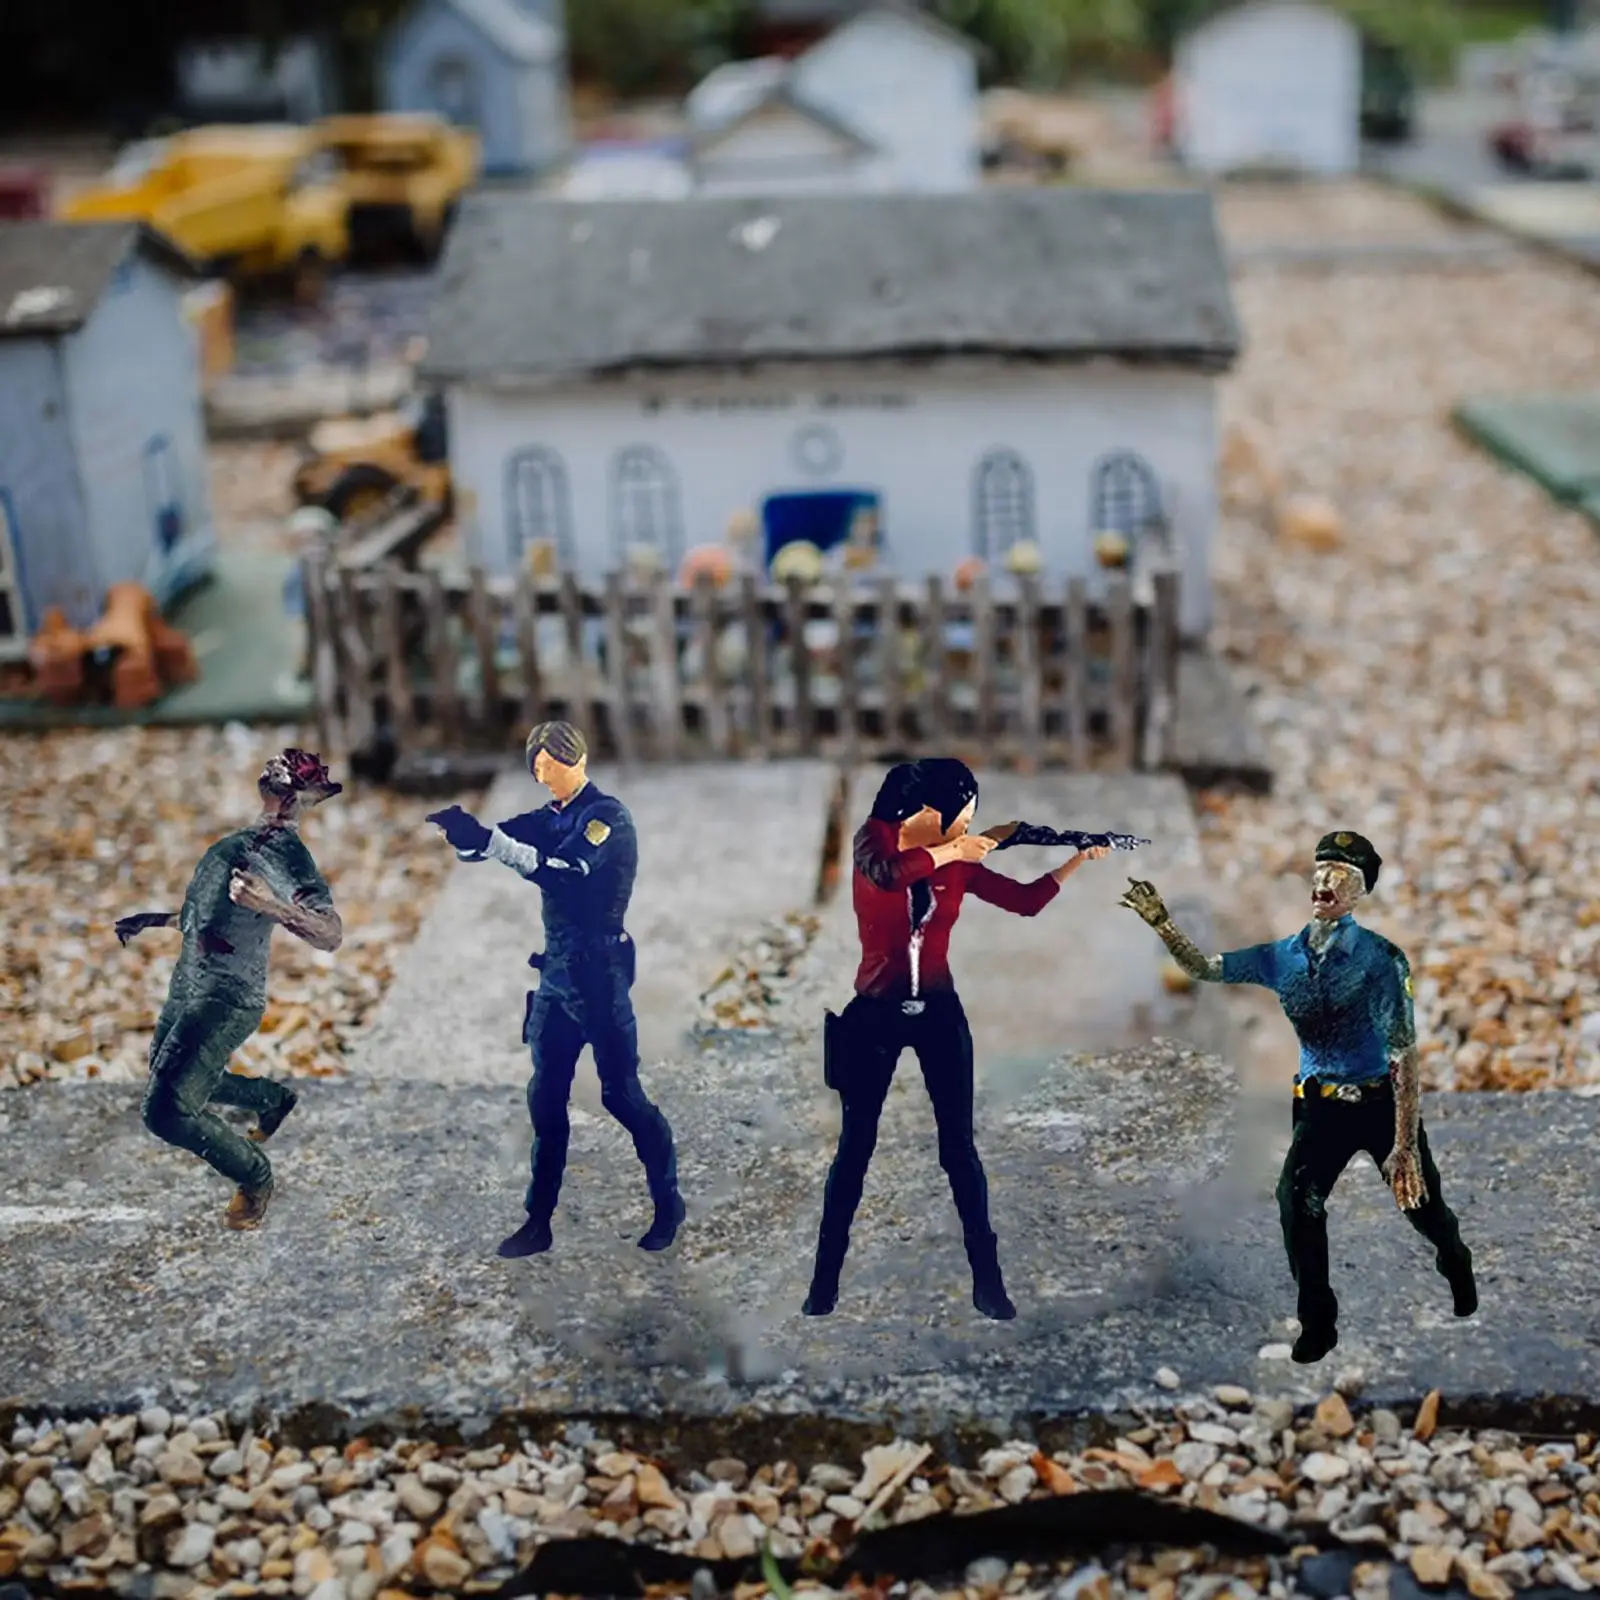 4Pcs 1/64 People and Zombie Figures Train Railway Collections Movie Props Diorama Scenery Resin Figurines Miniature Scenes Decor